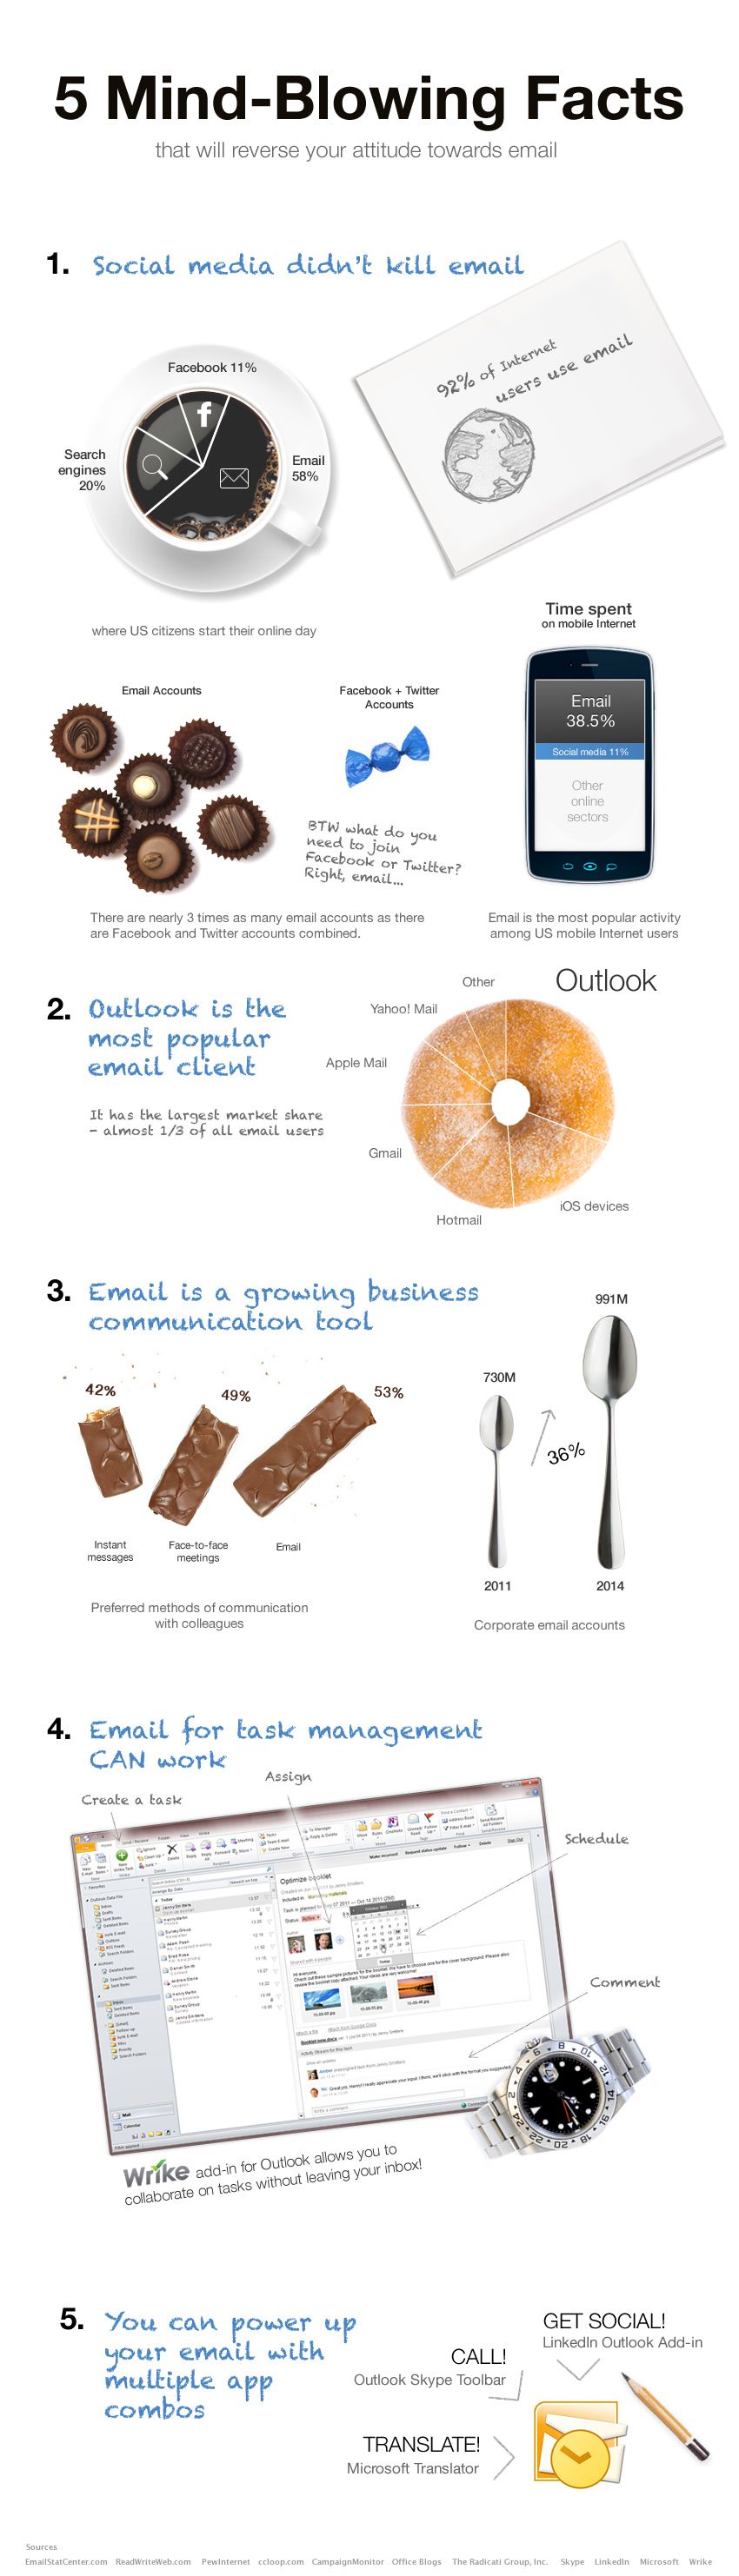 5 Surprising Facts About Email [INFOGRAPHIC]